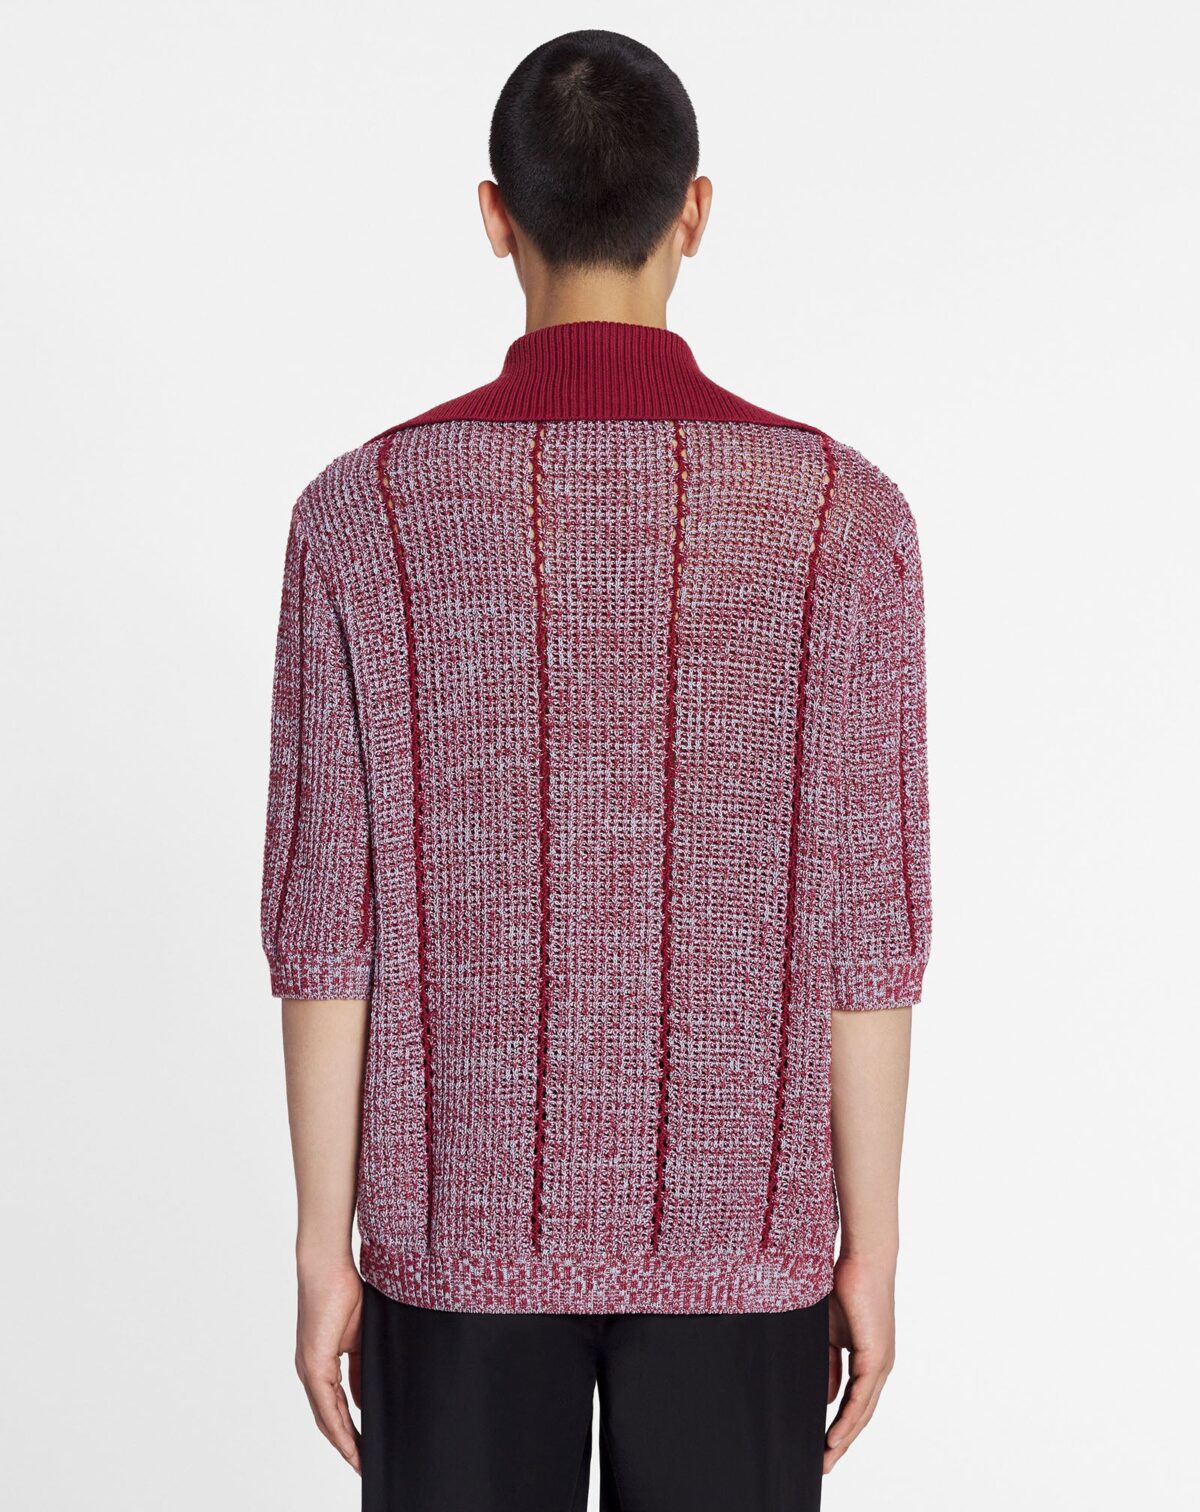 LOOSE-FITTING KNIT POLO SHIRT